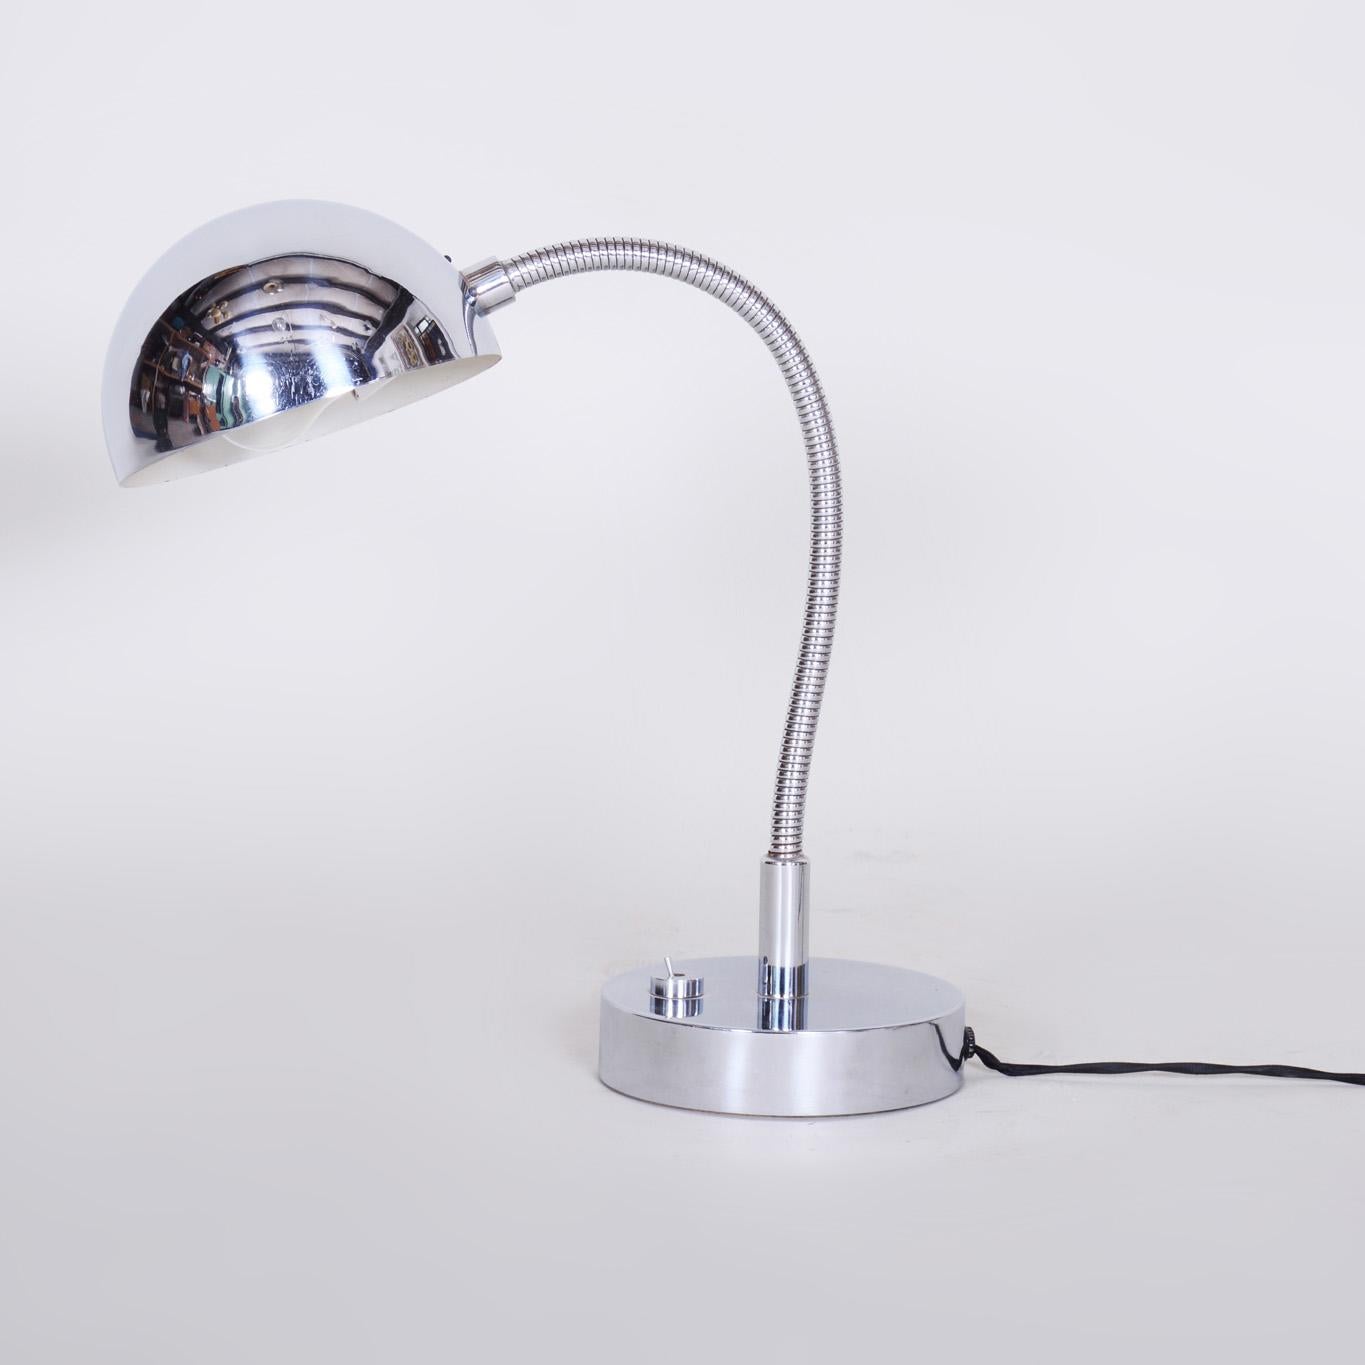 Early 20th Century Chrome Bauhaus Table Lamp, Newly Electrified, Designer M. Prokop, Czechia, 1920s For Sale